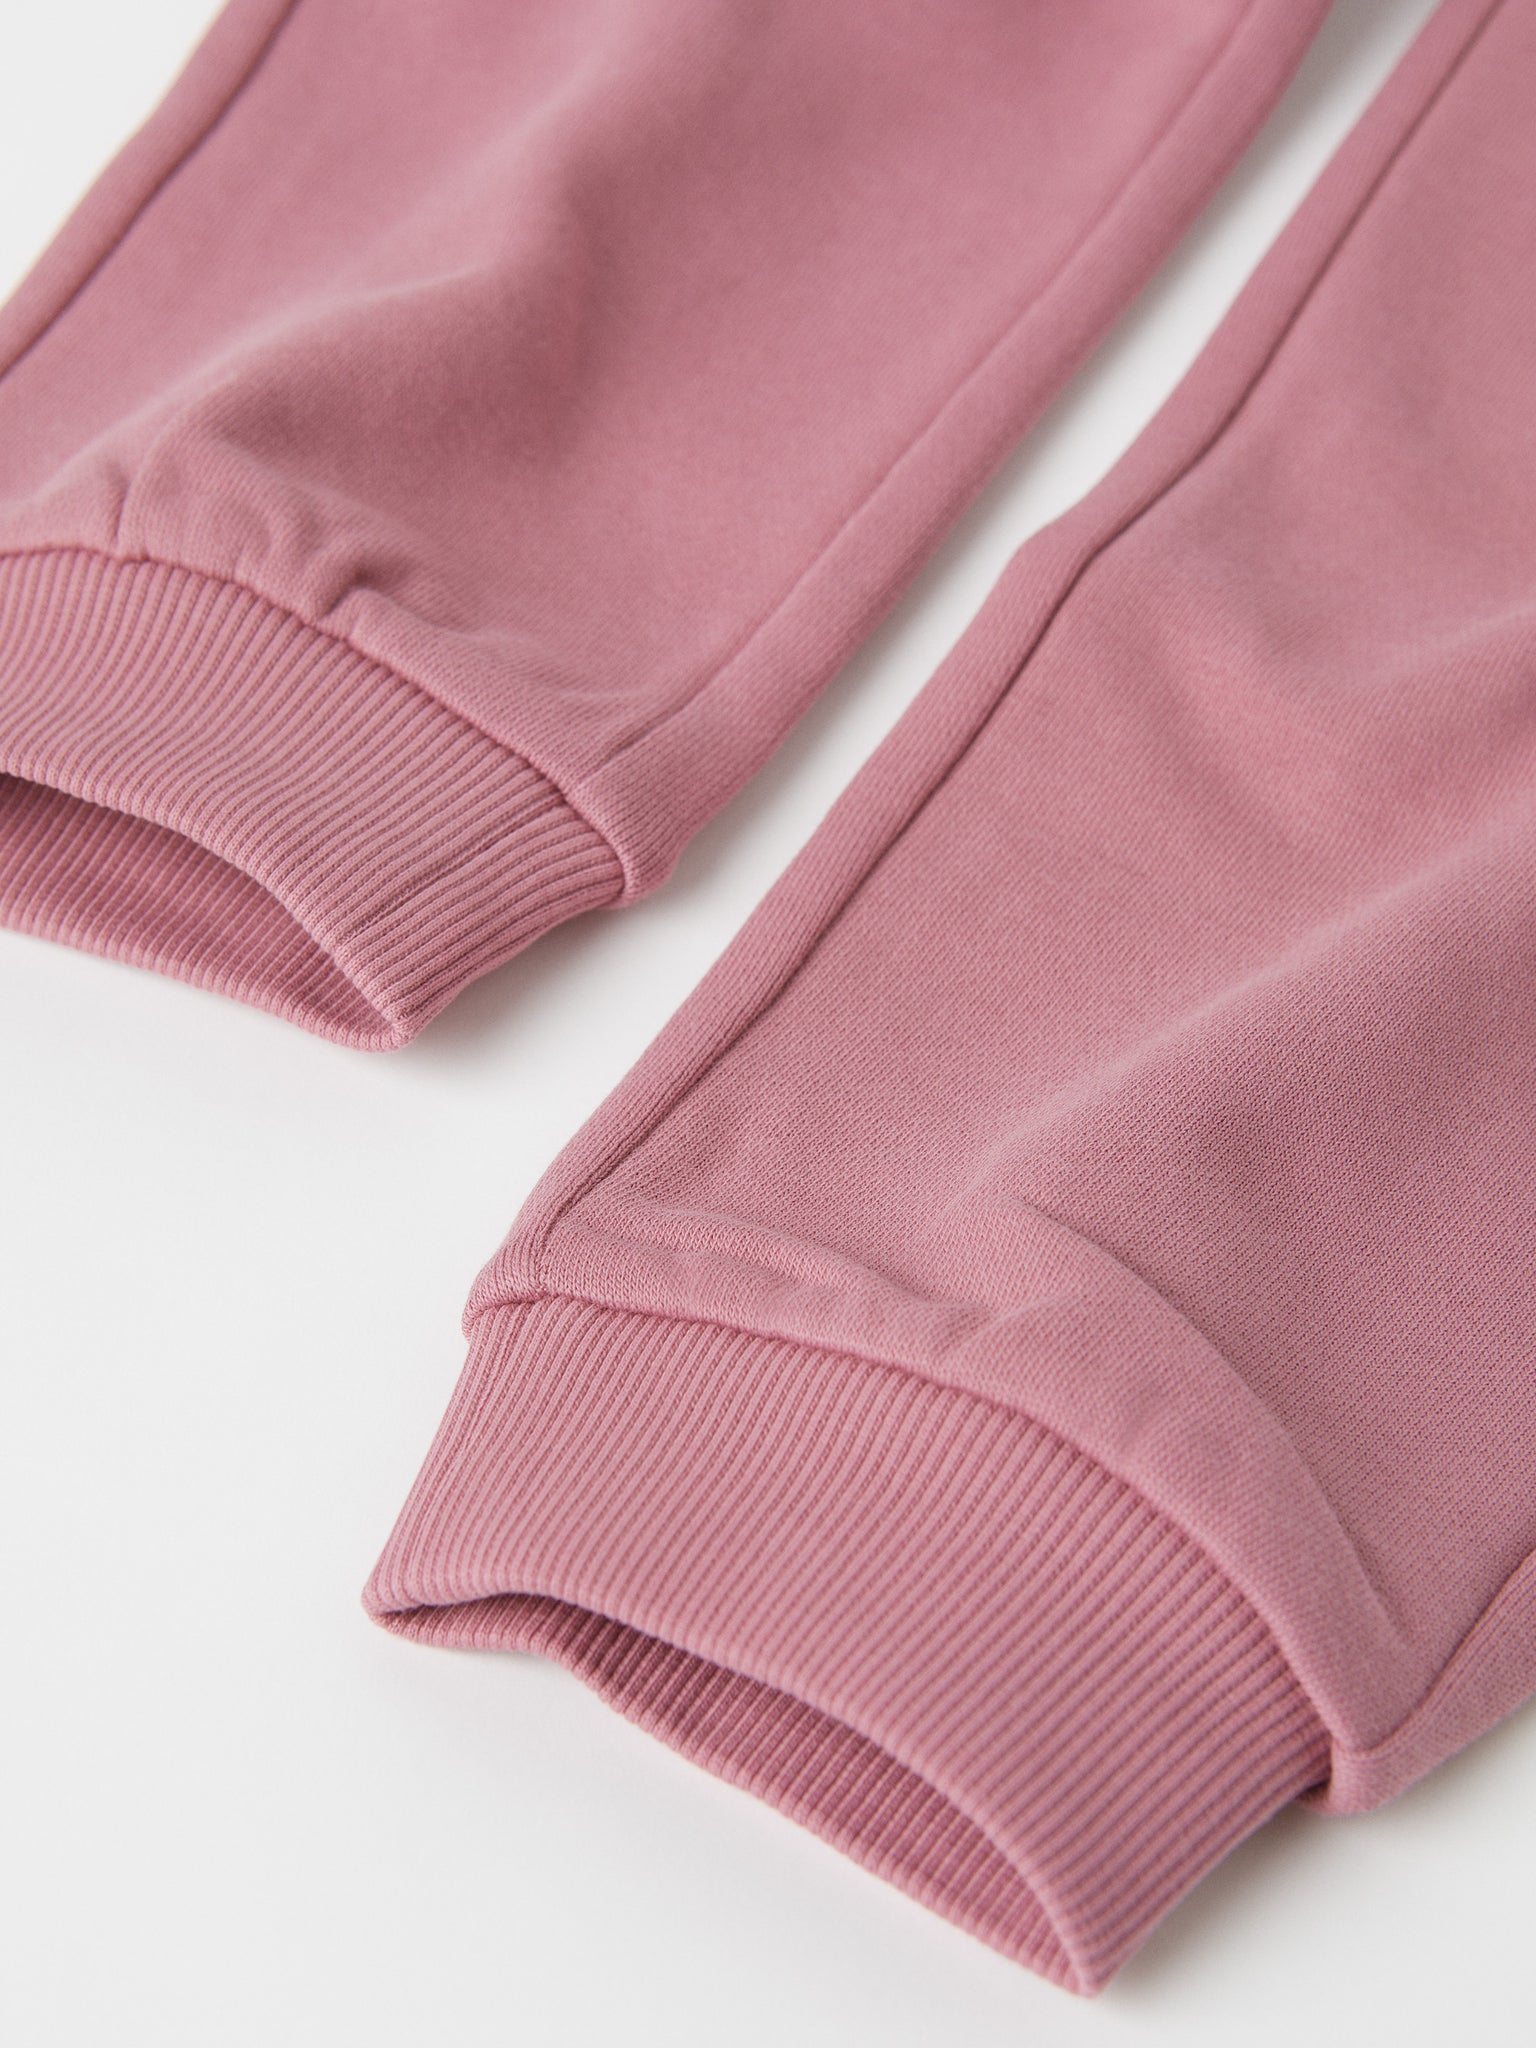 Organic Cotton Pink Kids Joggers from the Polarn O. Pyret kidswear collection. Clothes made using sustainably sourced materials.